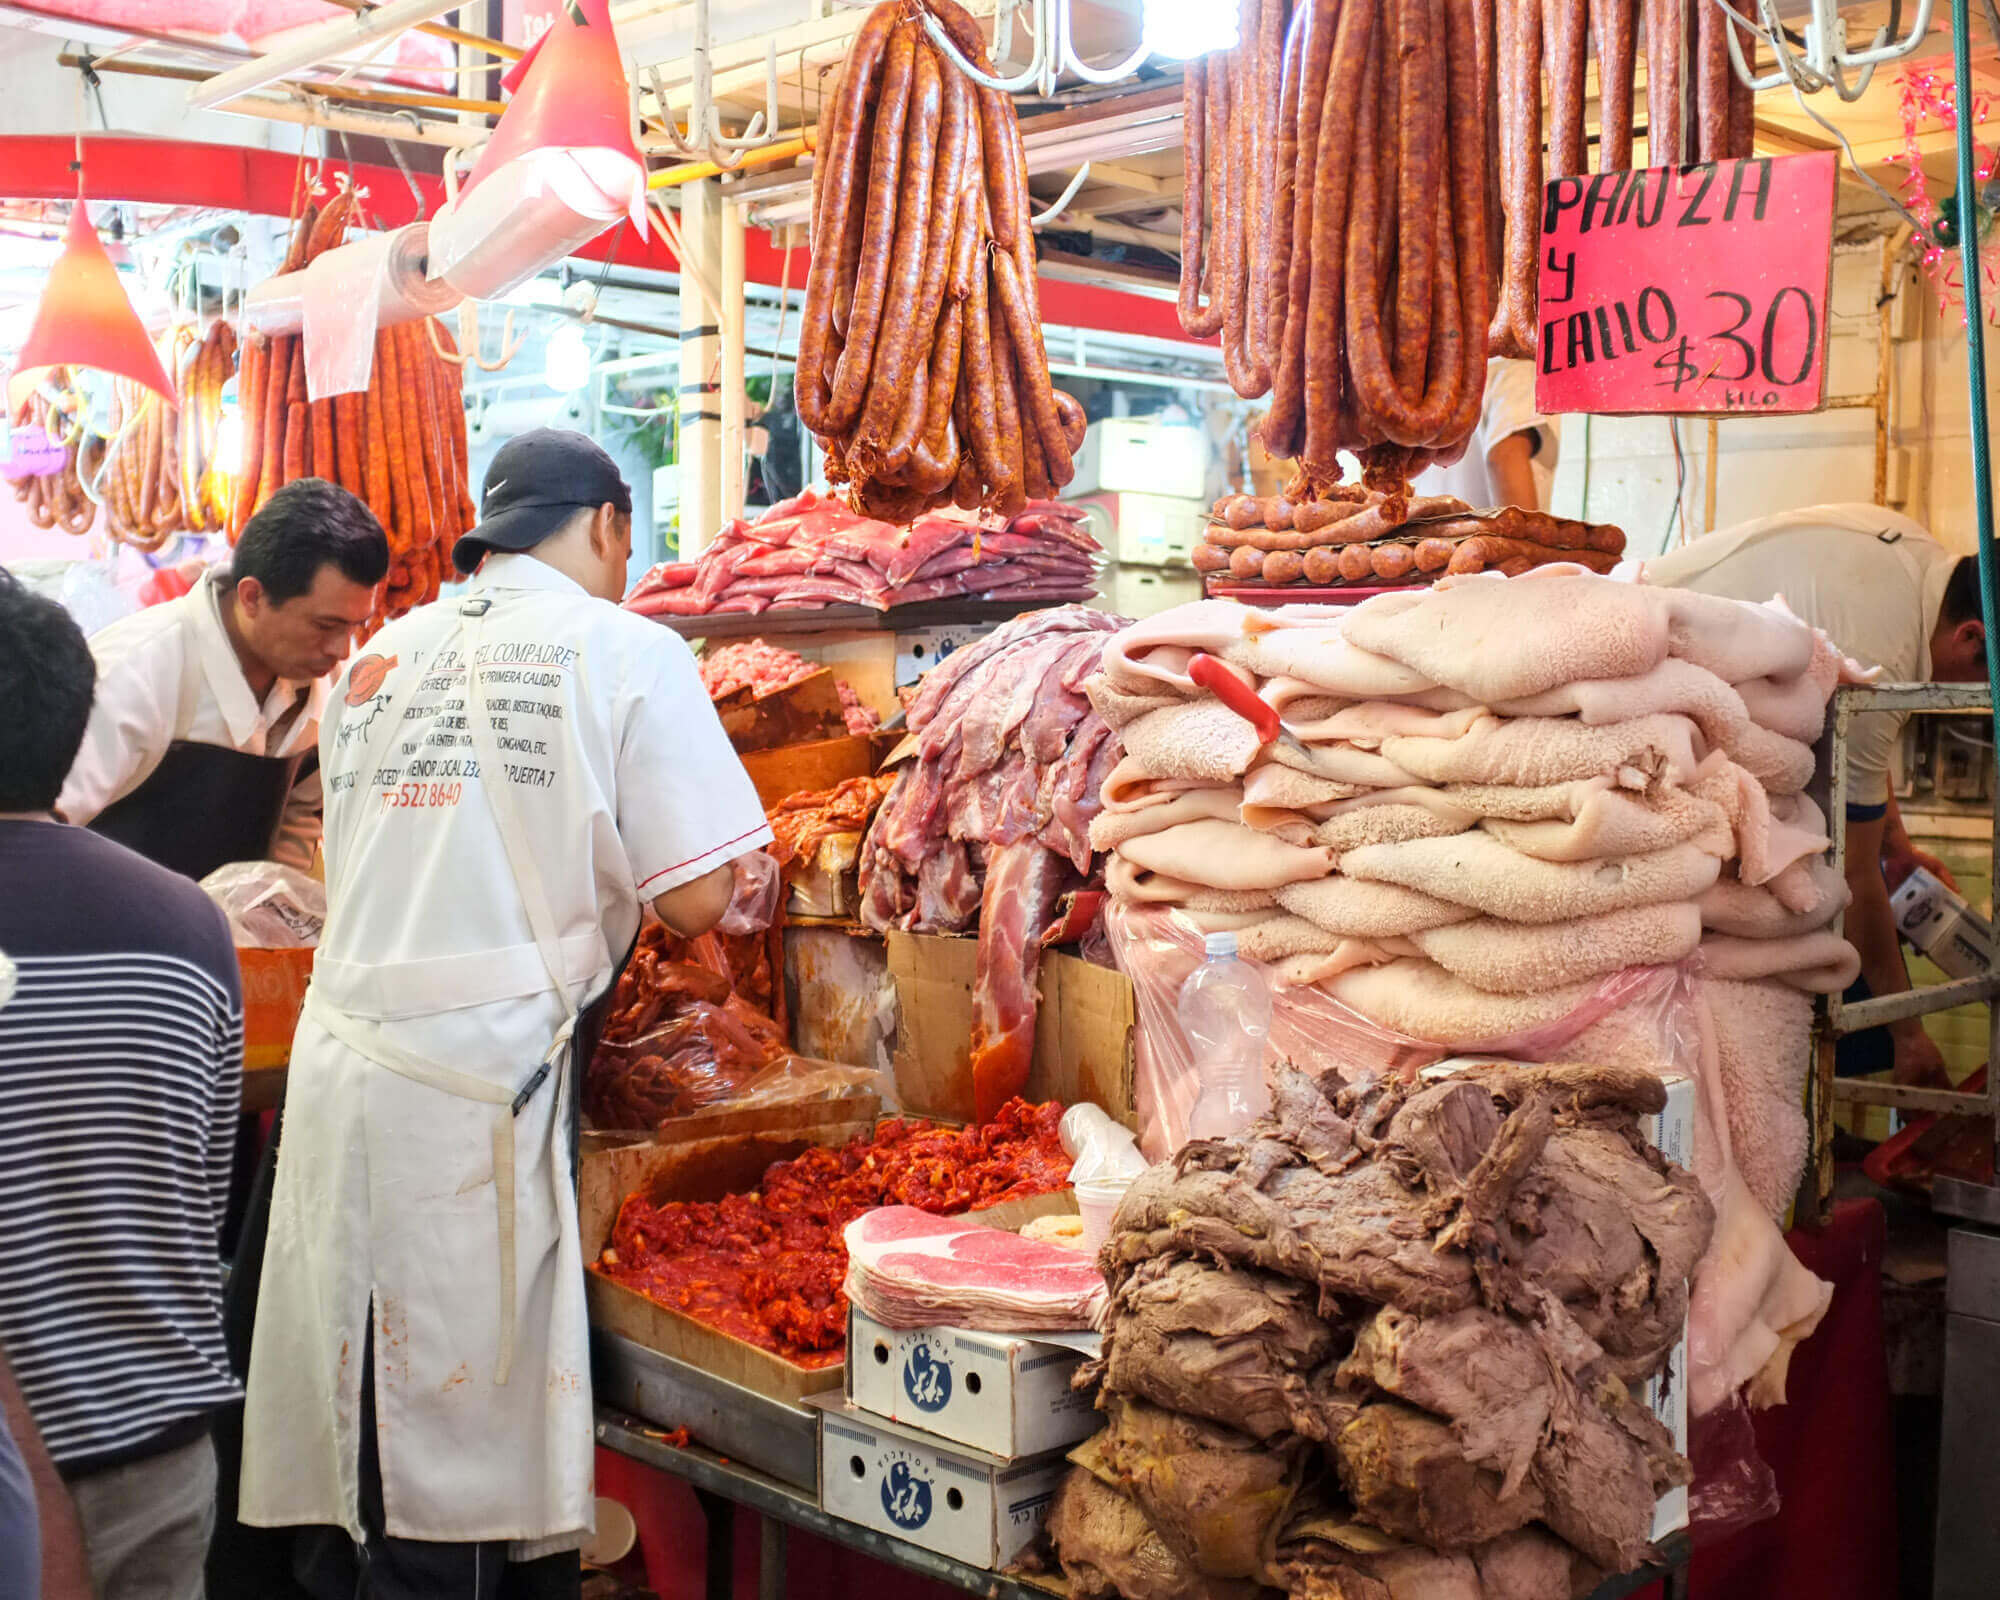 Organized stacks of meat at La Merced